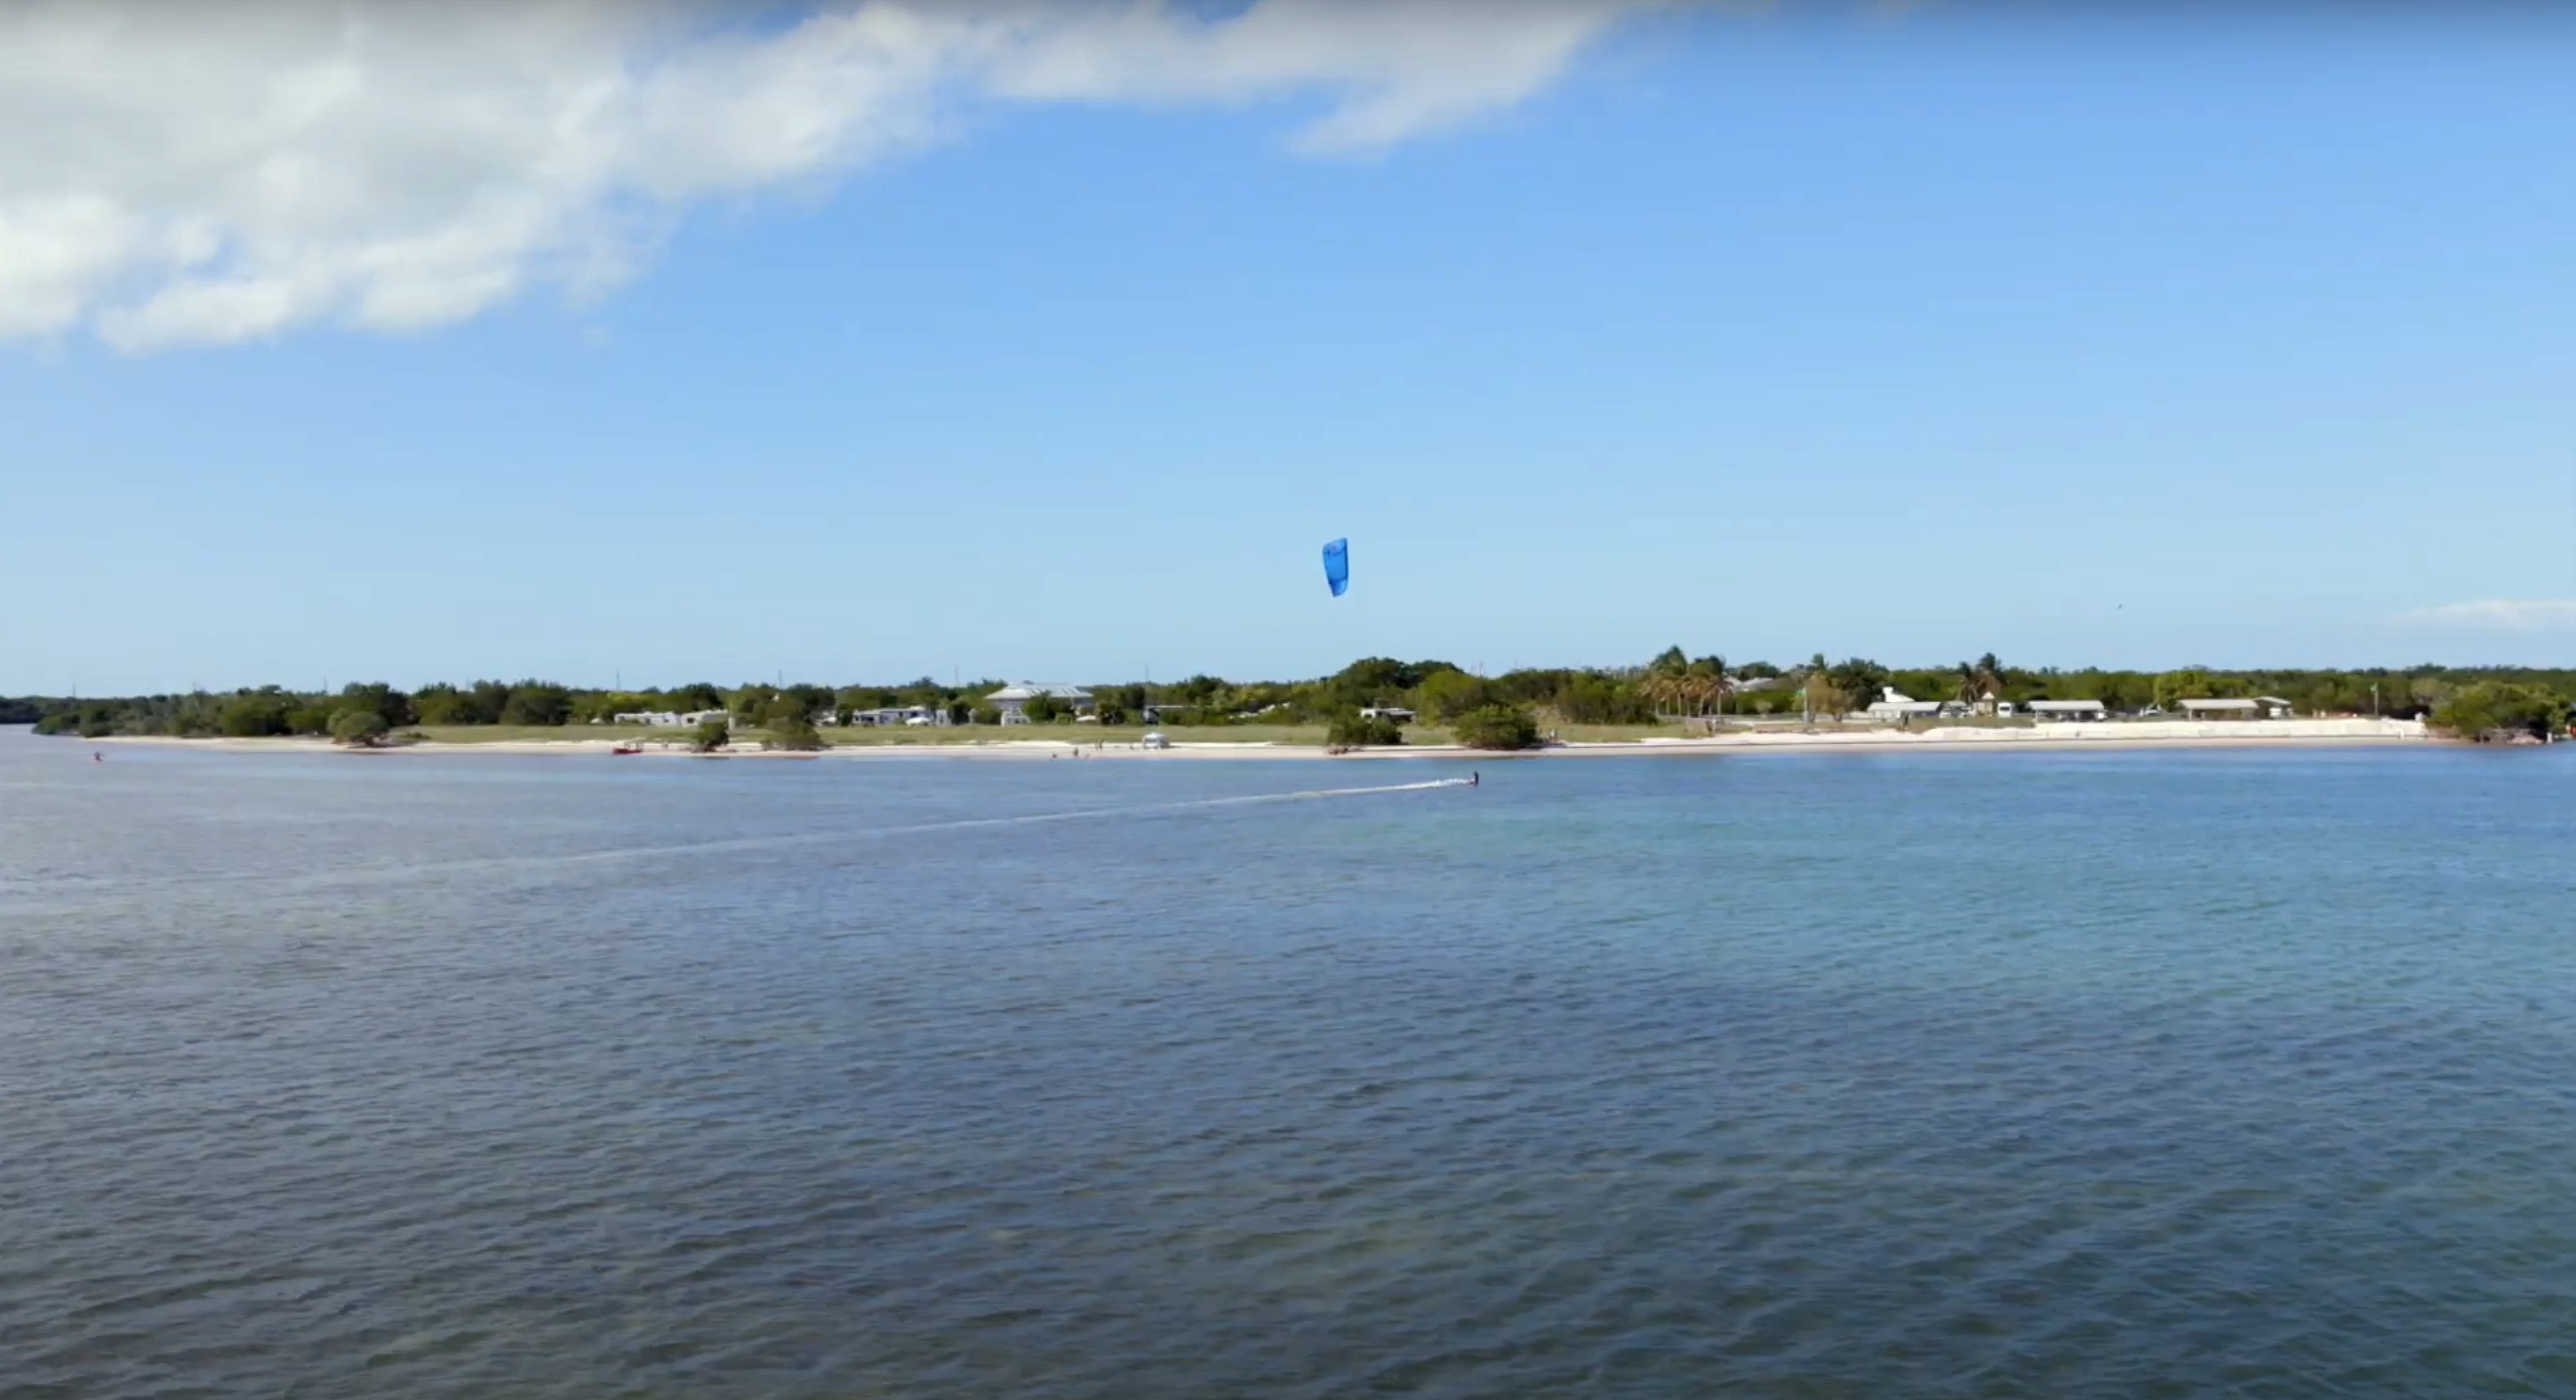 Kitesurfing and wingfoil at Curry Hammock .png__PID:7eb8eb9e-90c6-4c75-a32f-53cdeaffc0cb